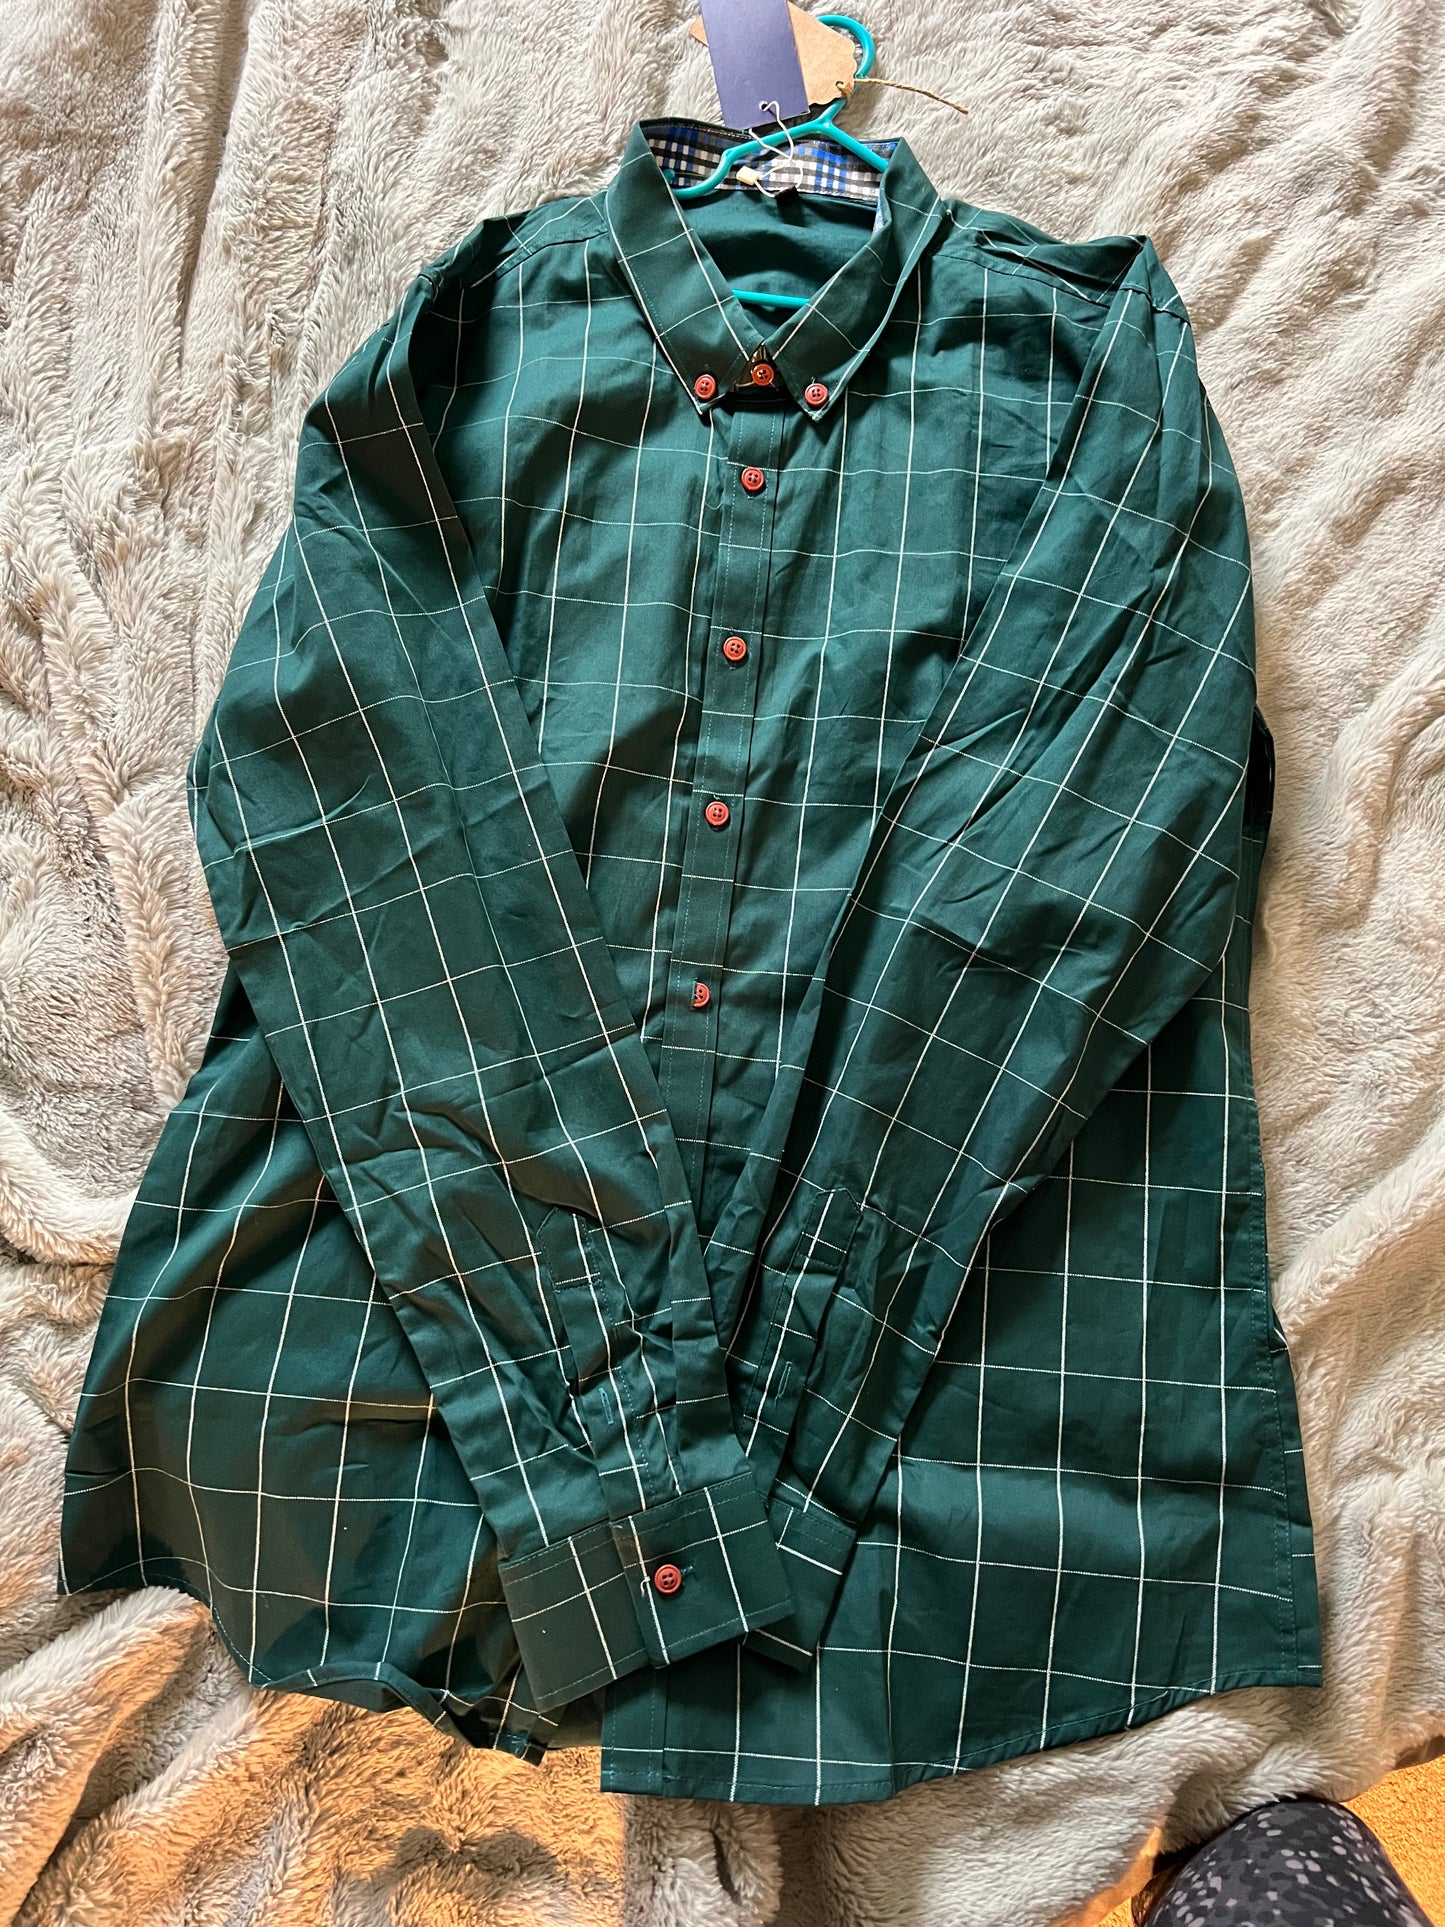 **REDUCED** NWT Aiyino Men's Green Plaid Longsleeve Collared Shirt Size M